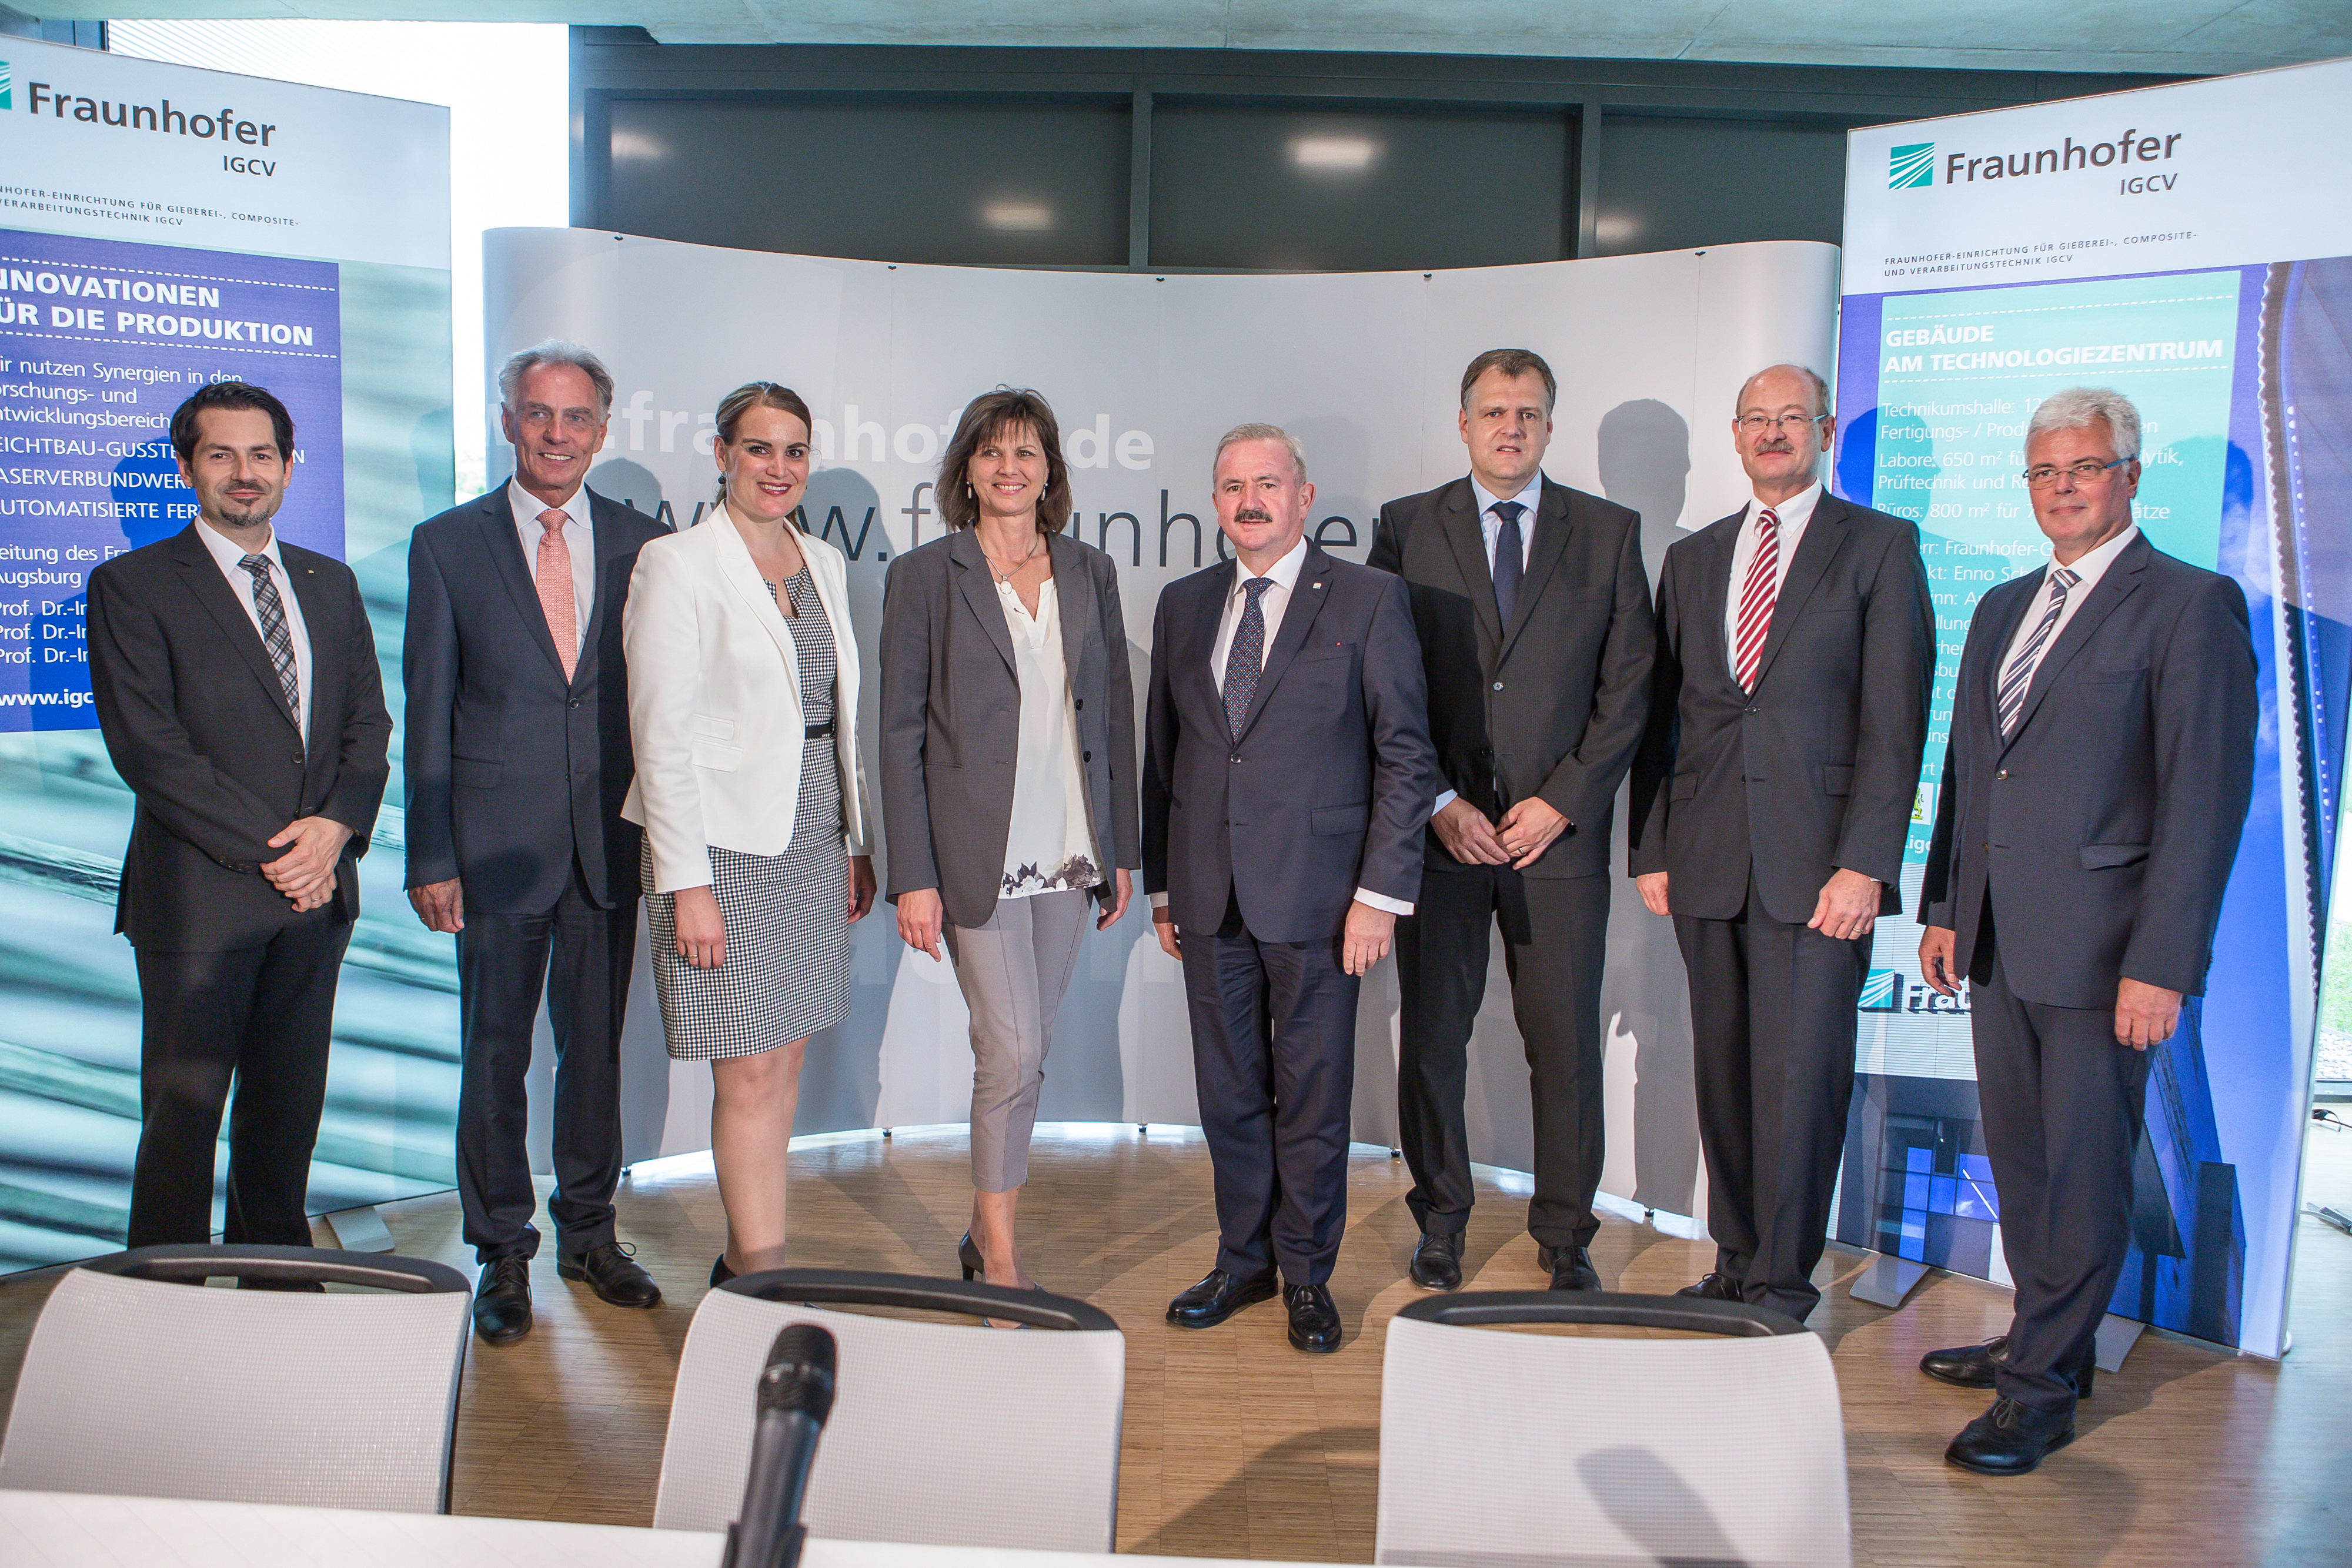 Press conference on the occasion of the foundation of Fraunhofer IGCV